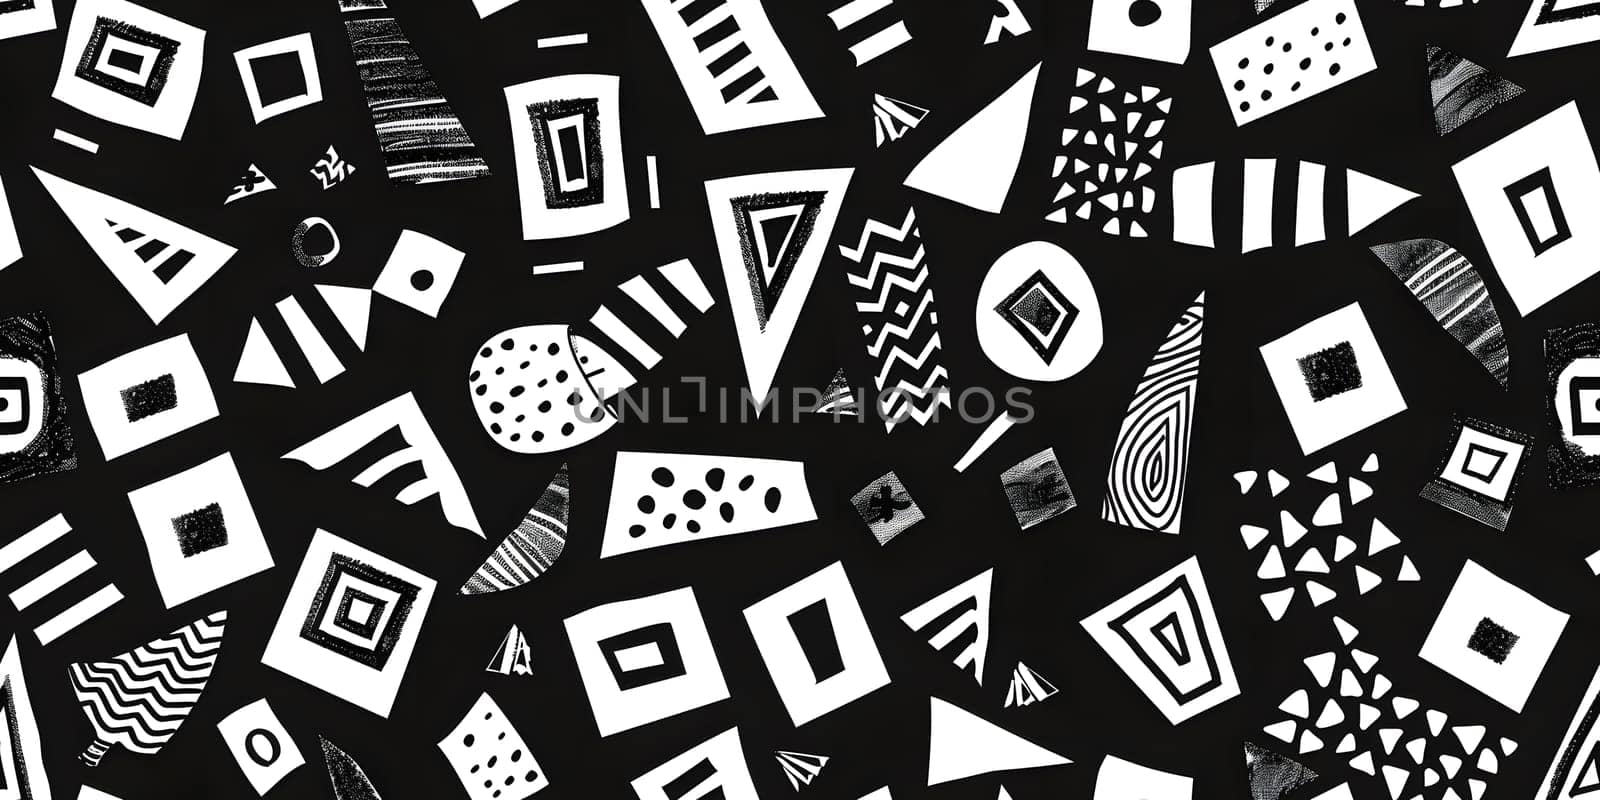 Product featuring a blackandwhite geometric pattern with triangles and squares on a black background, creating a stylish design with symmetry and clean lines. Made of grey textile material